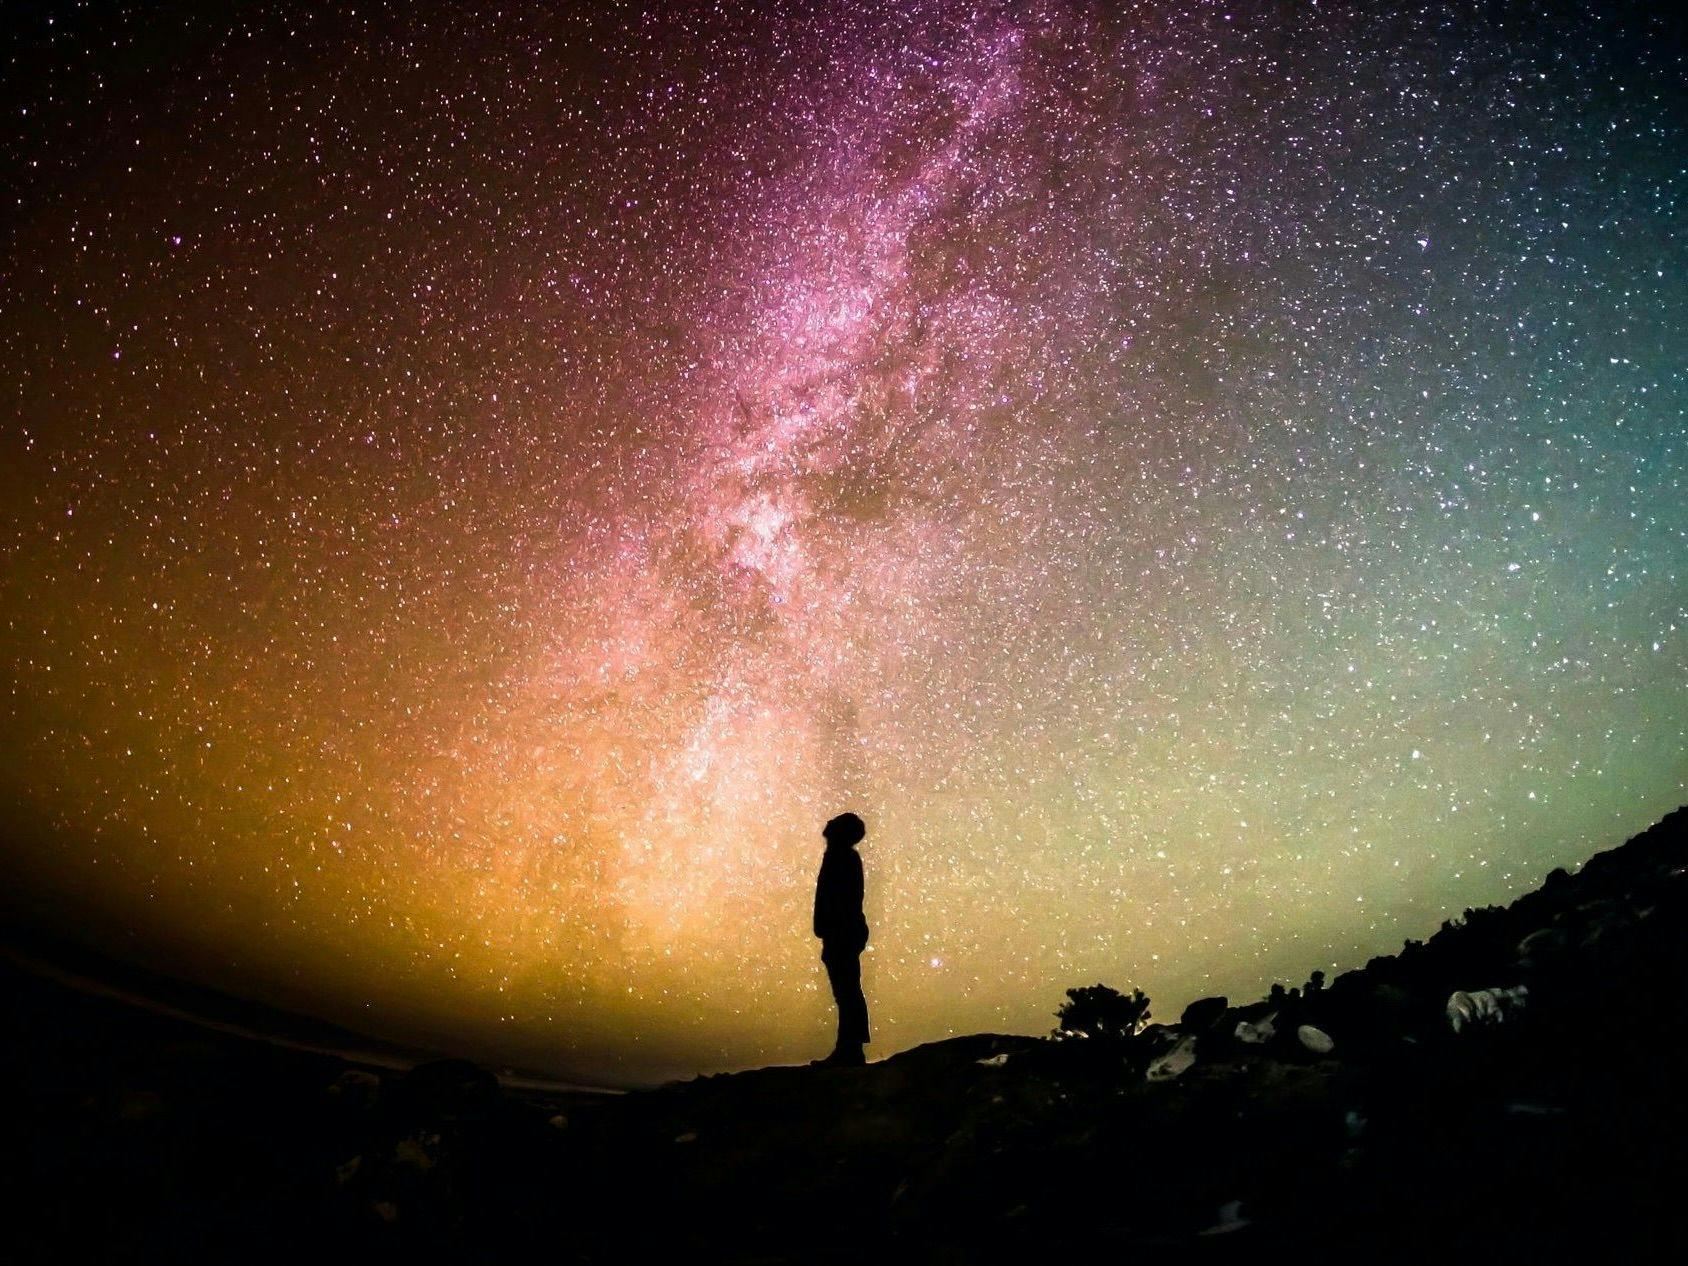 The  silhouette of a person against a colorful, starry night sky.